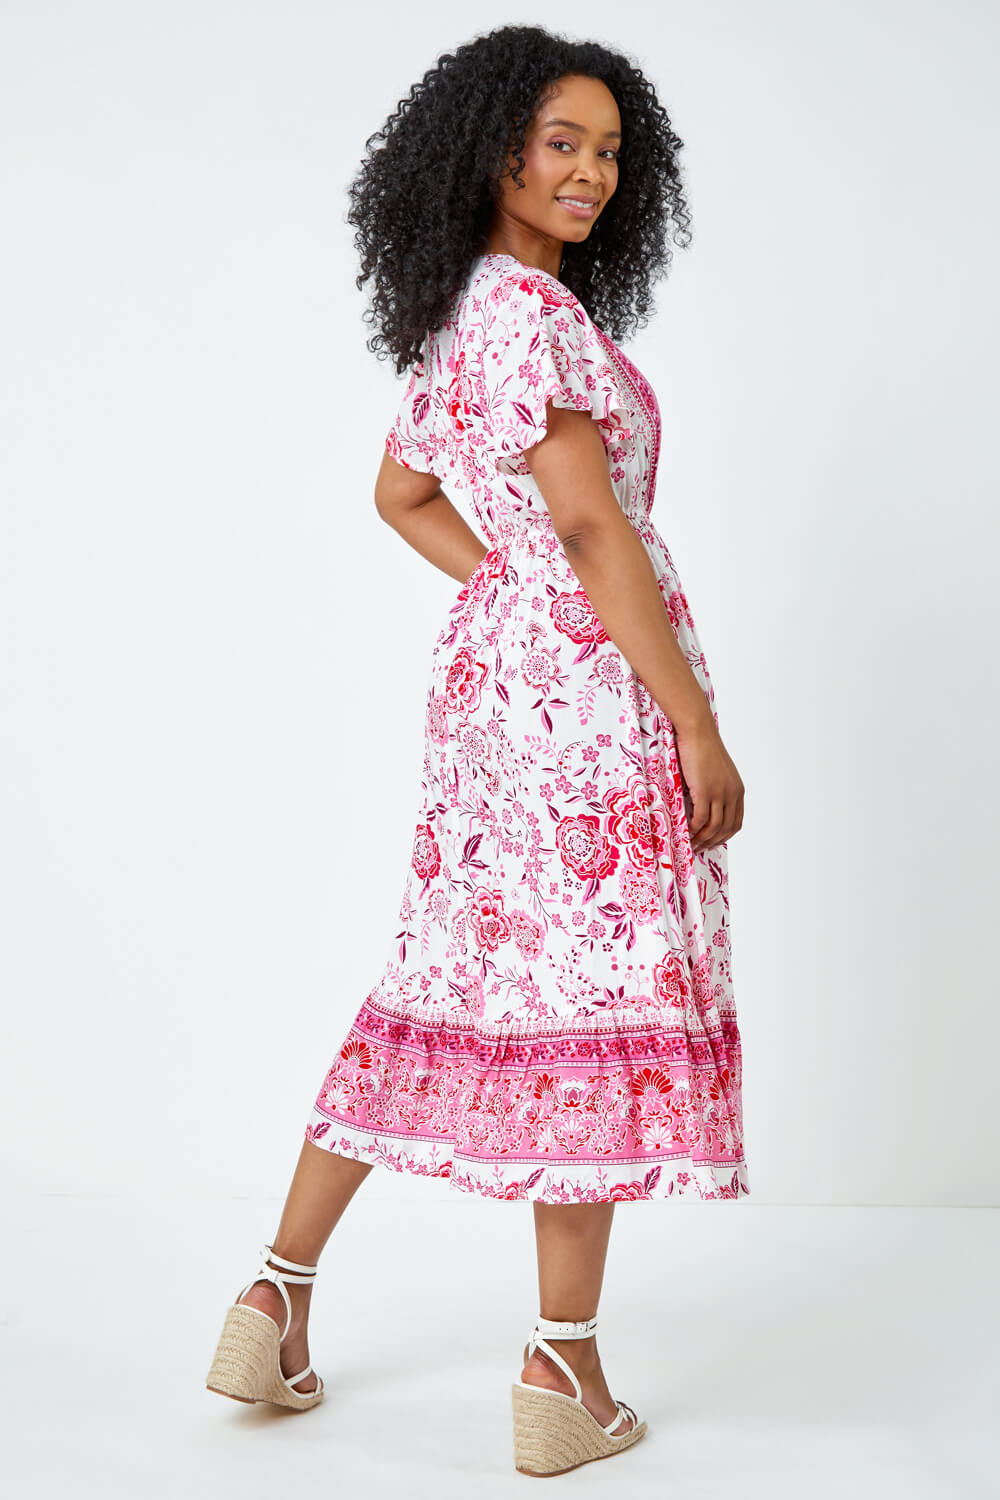 PINK Petite Floral Print Tiered Boho Dress, Image 3 of 5